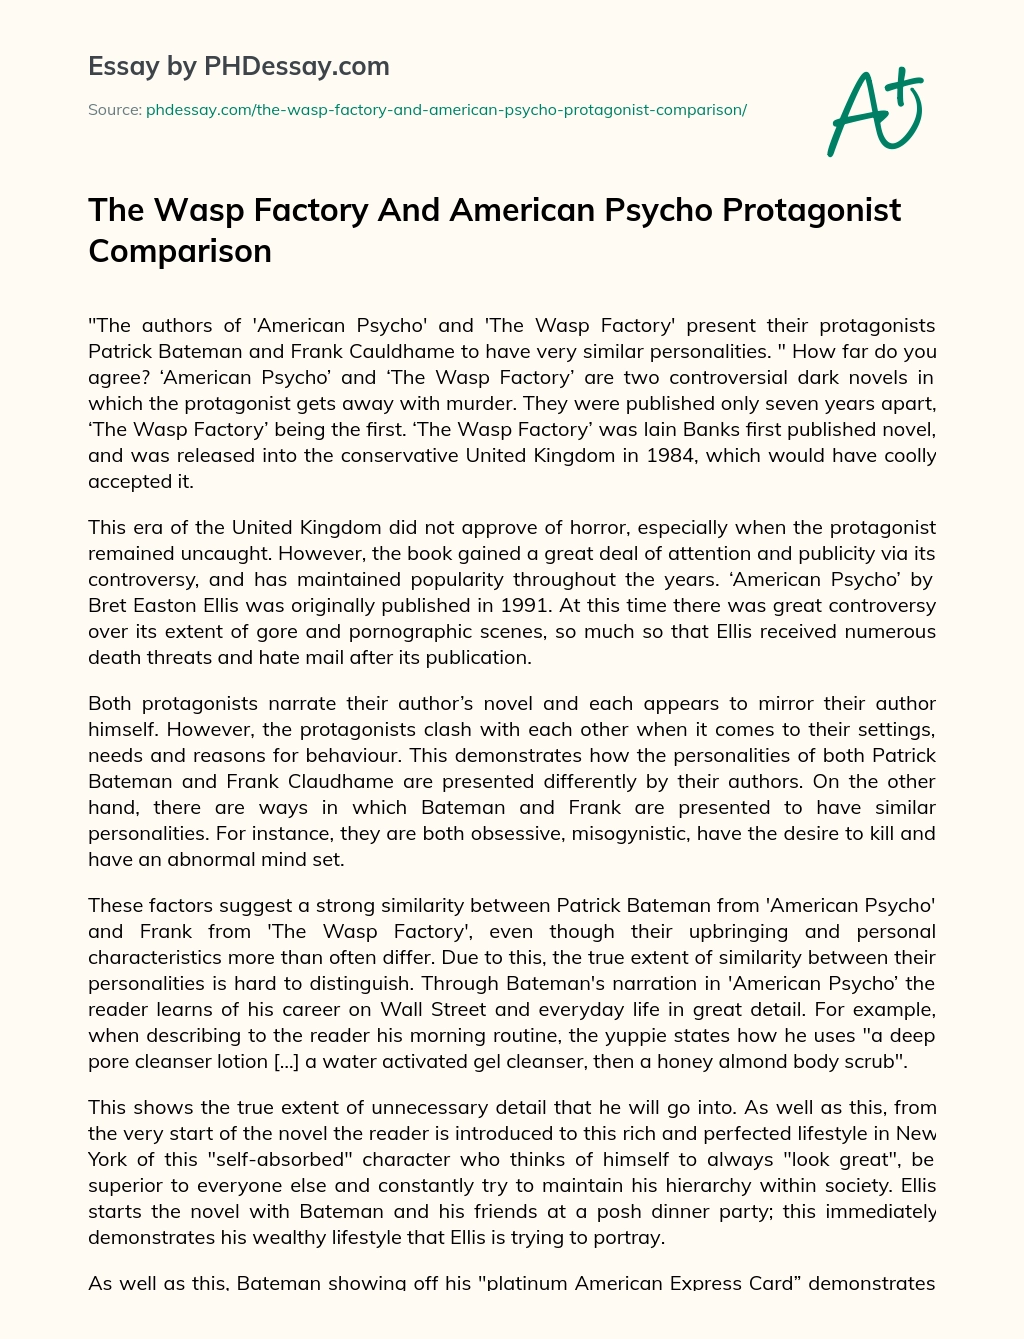 The Wasp Factory And American Psycho Protagonist Comparison essay